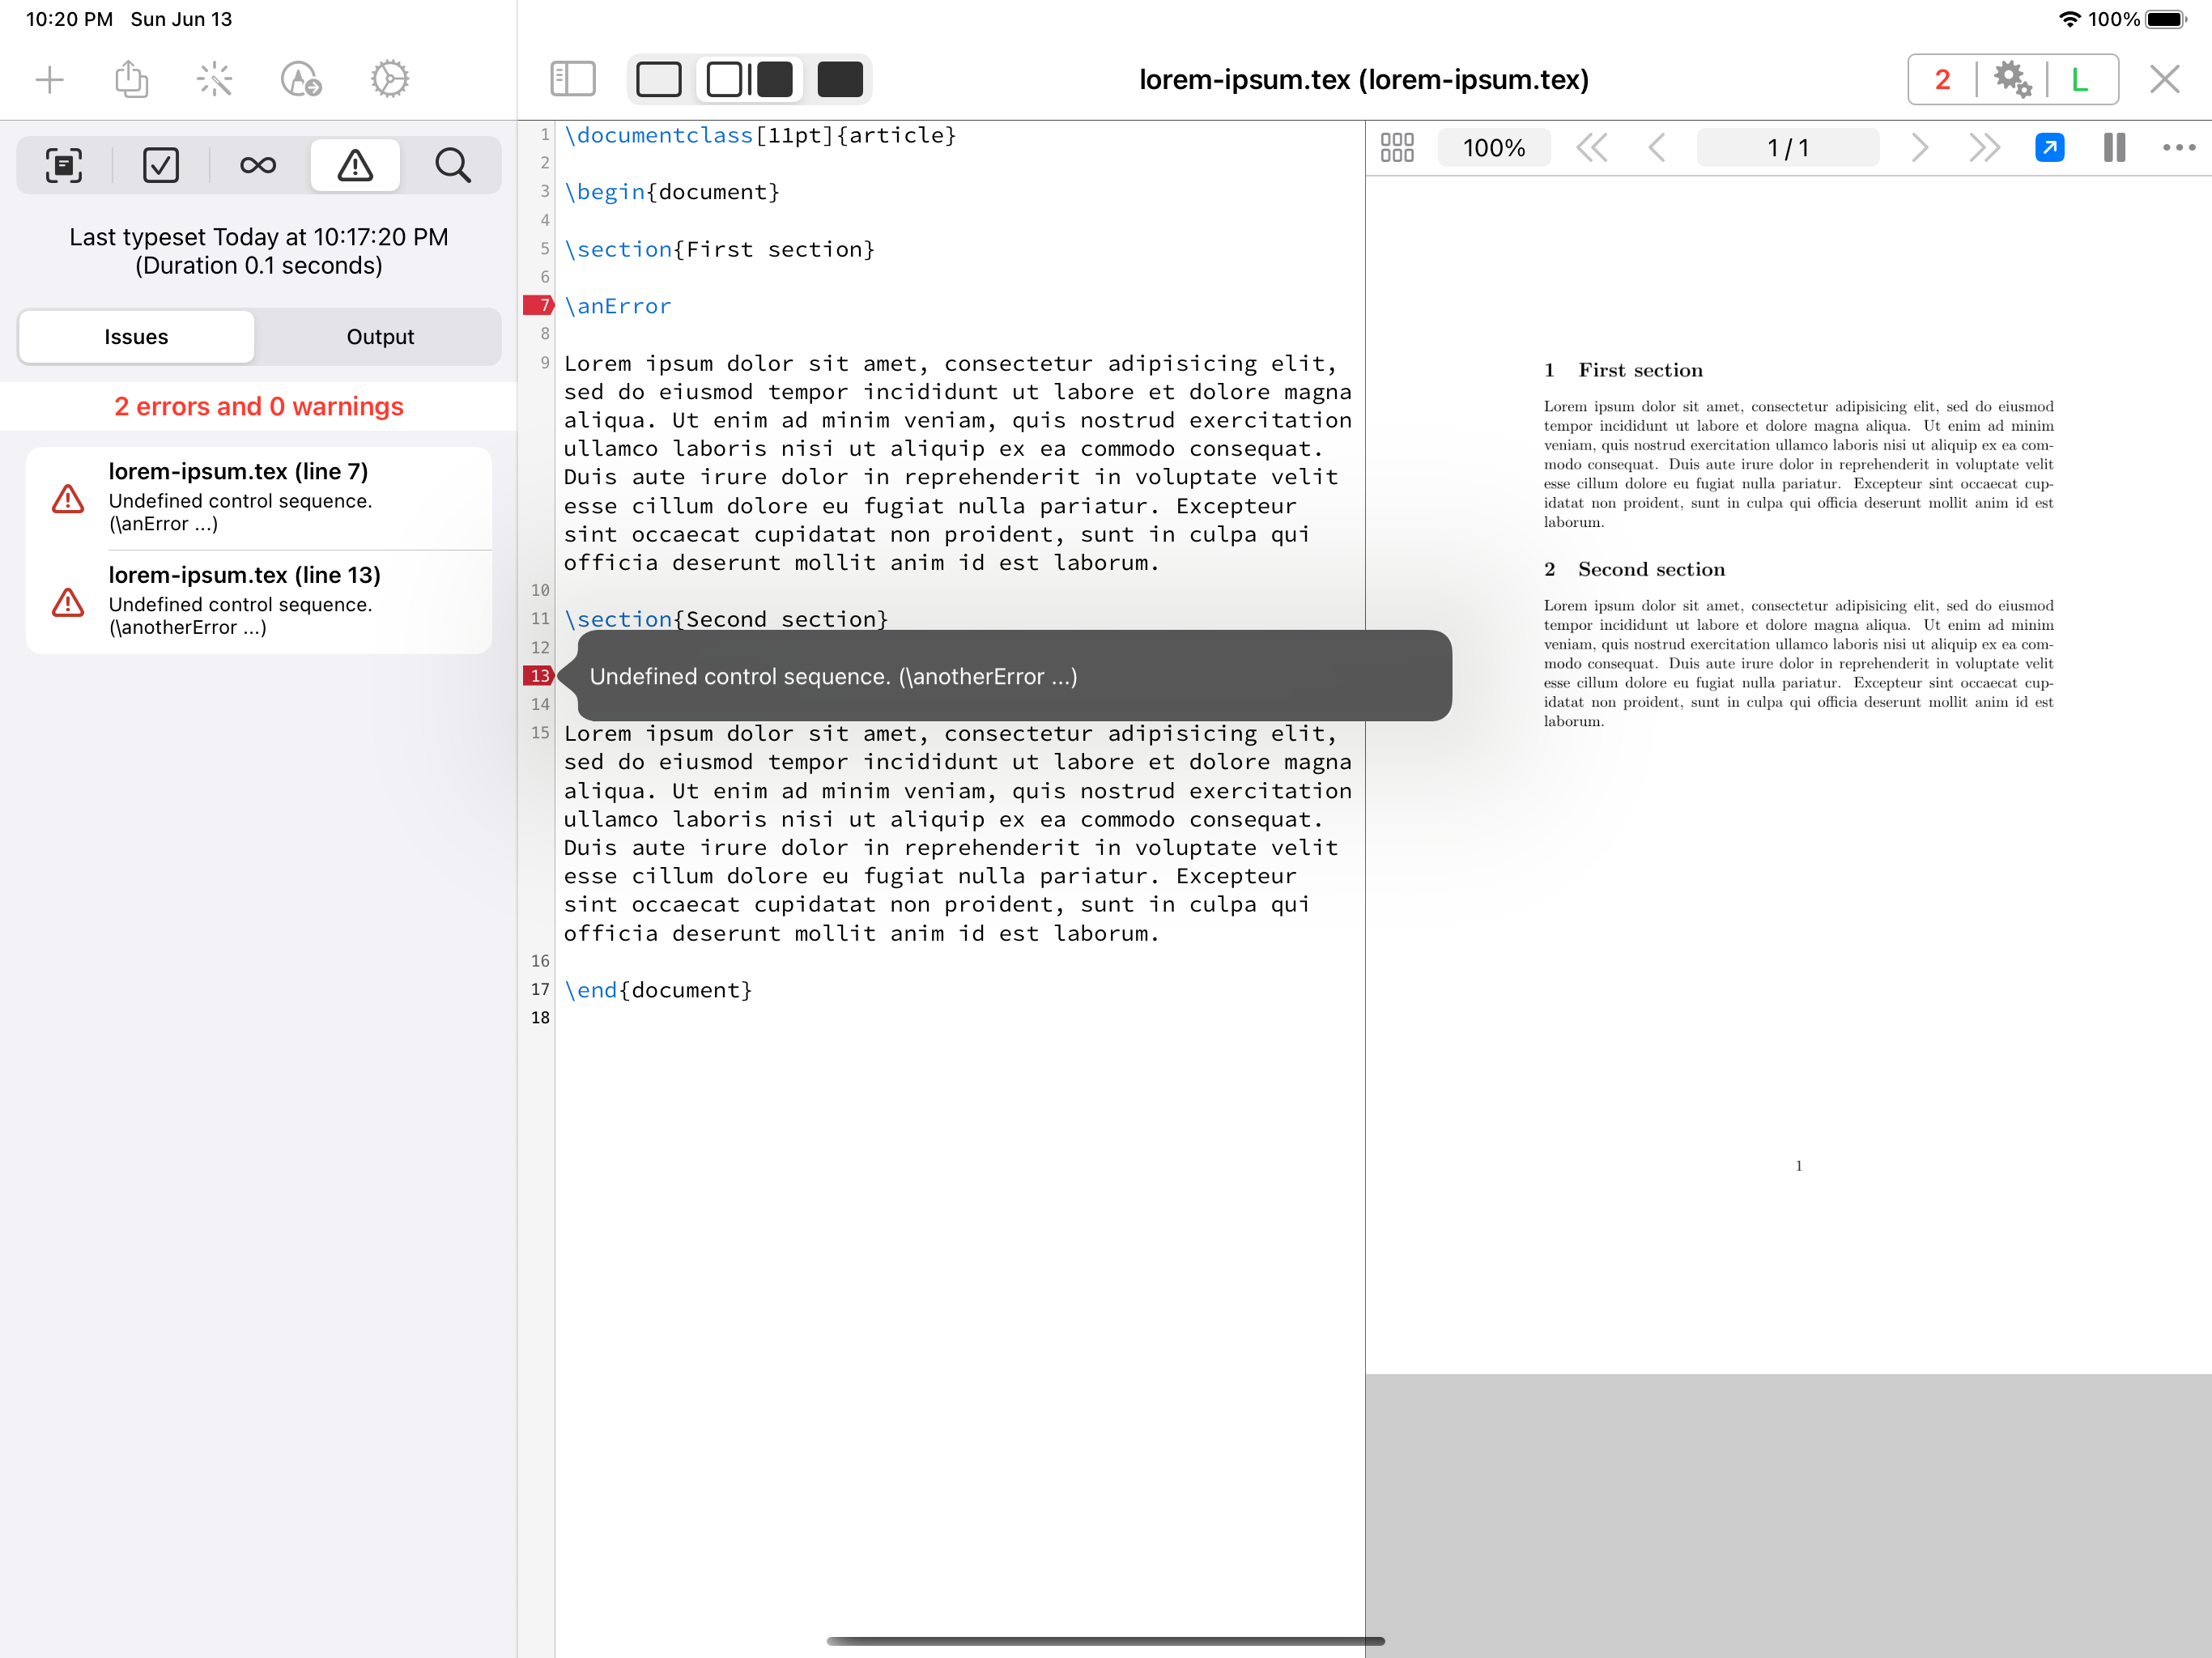 docs/apps/workspace/typesetting/issues/error-popover_ios_ipad.png